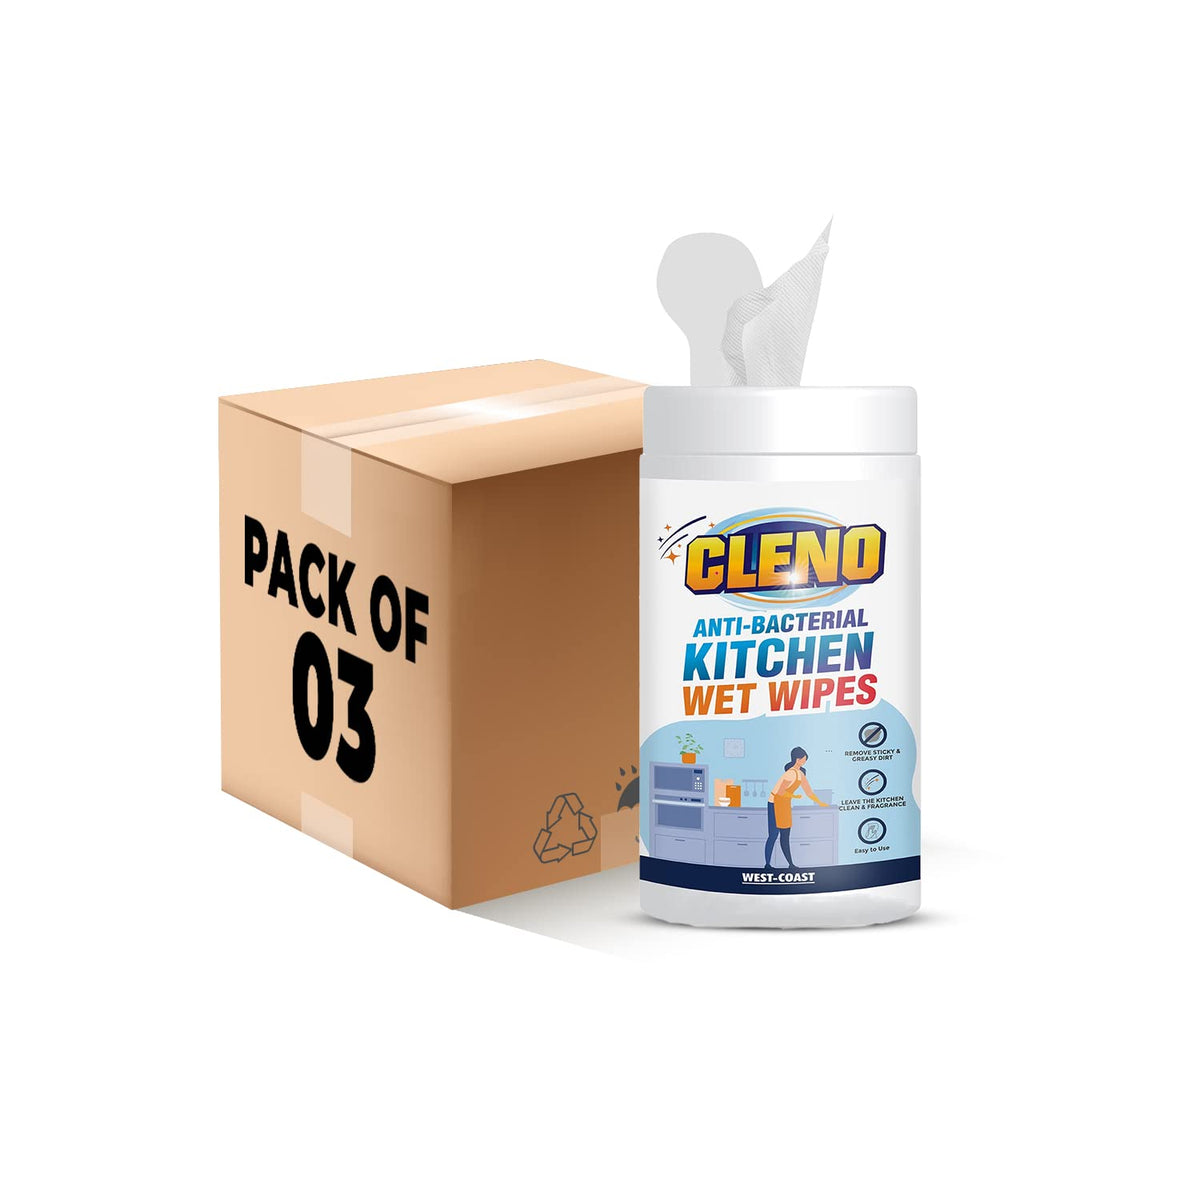 Cleno Kitchen Wet Wipes to Clean Sticky, Greasy Dirt on Platform, Shelves, Jars, Floor & Sink - 50 Wipes (Ready to Use) (Pack of 3)